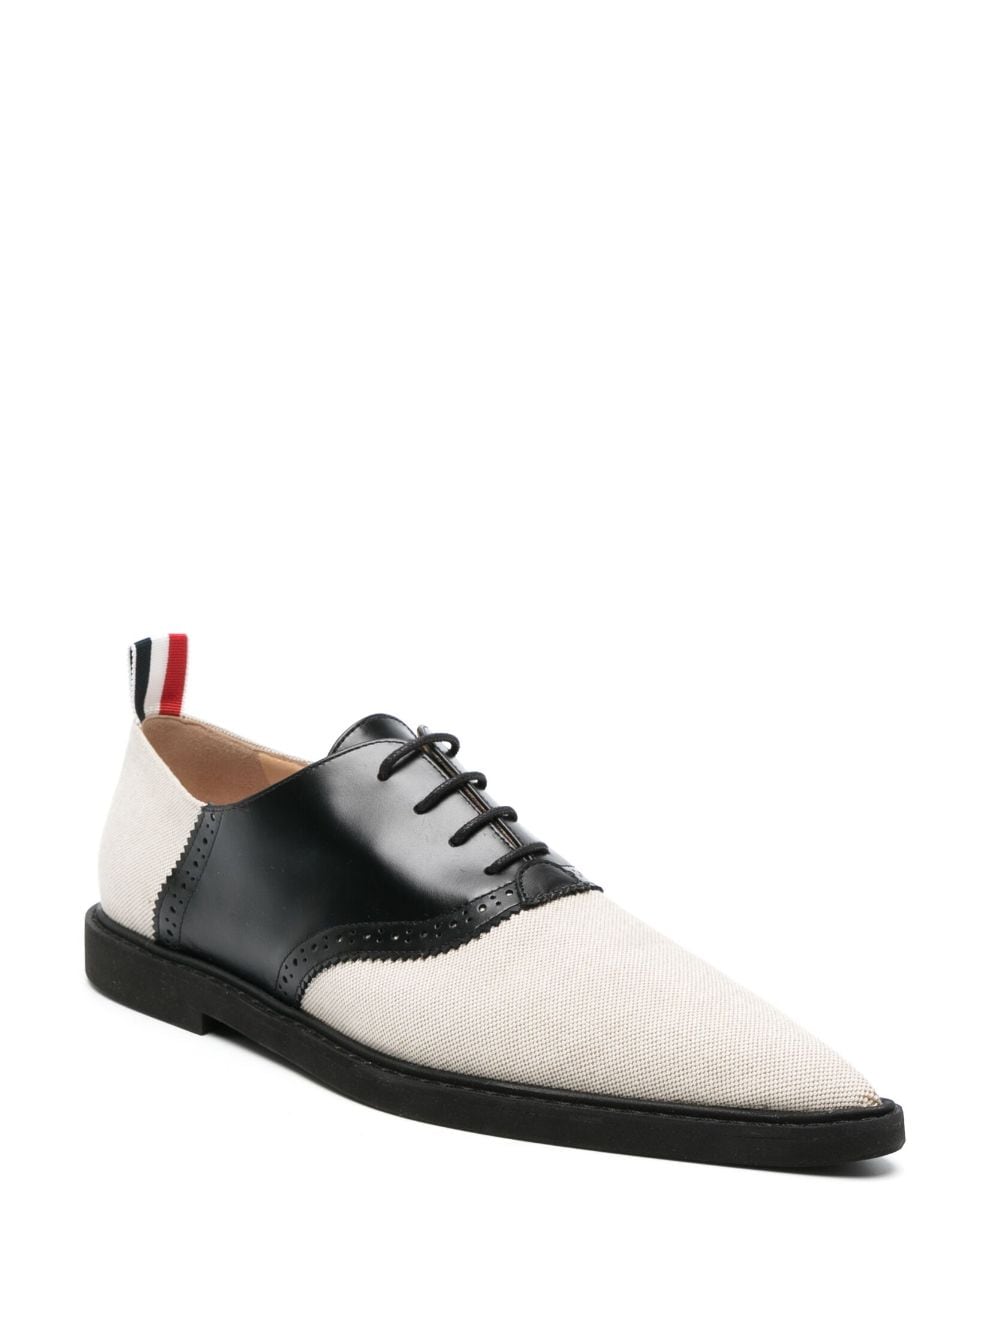 Image 2 of Thom Browne colour-block Oxford shoes